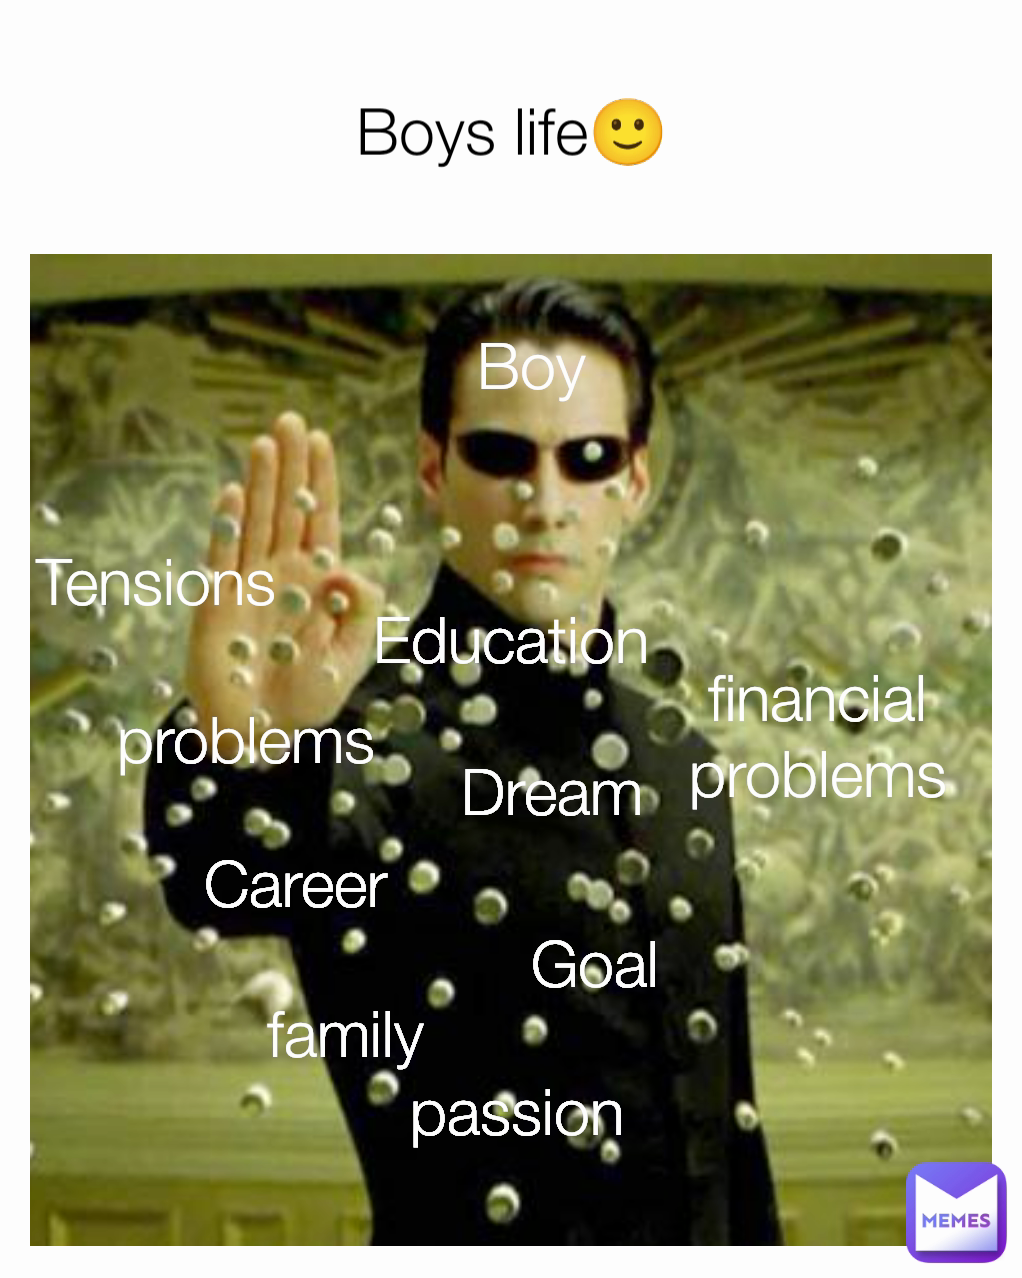 Tensions family financial problems Education passion Career problems Boys life🙂 Dream Goal Boy